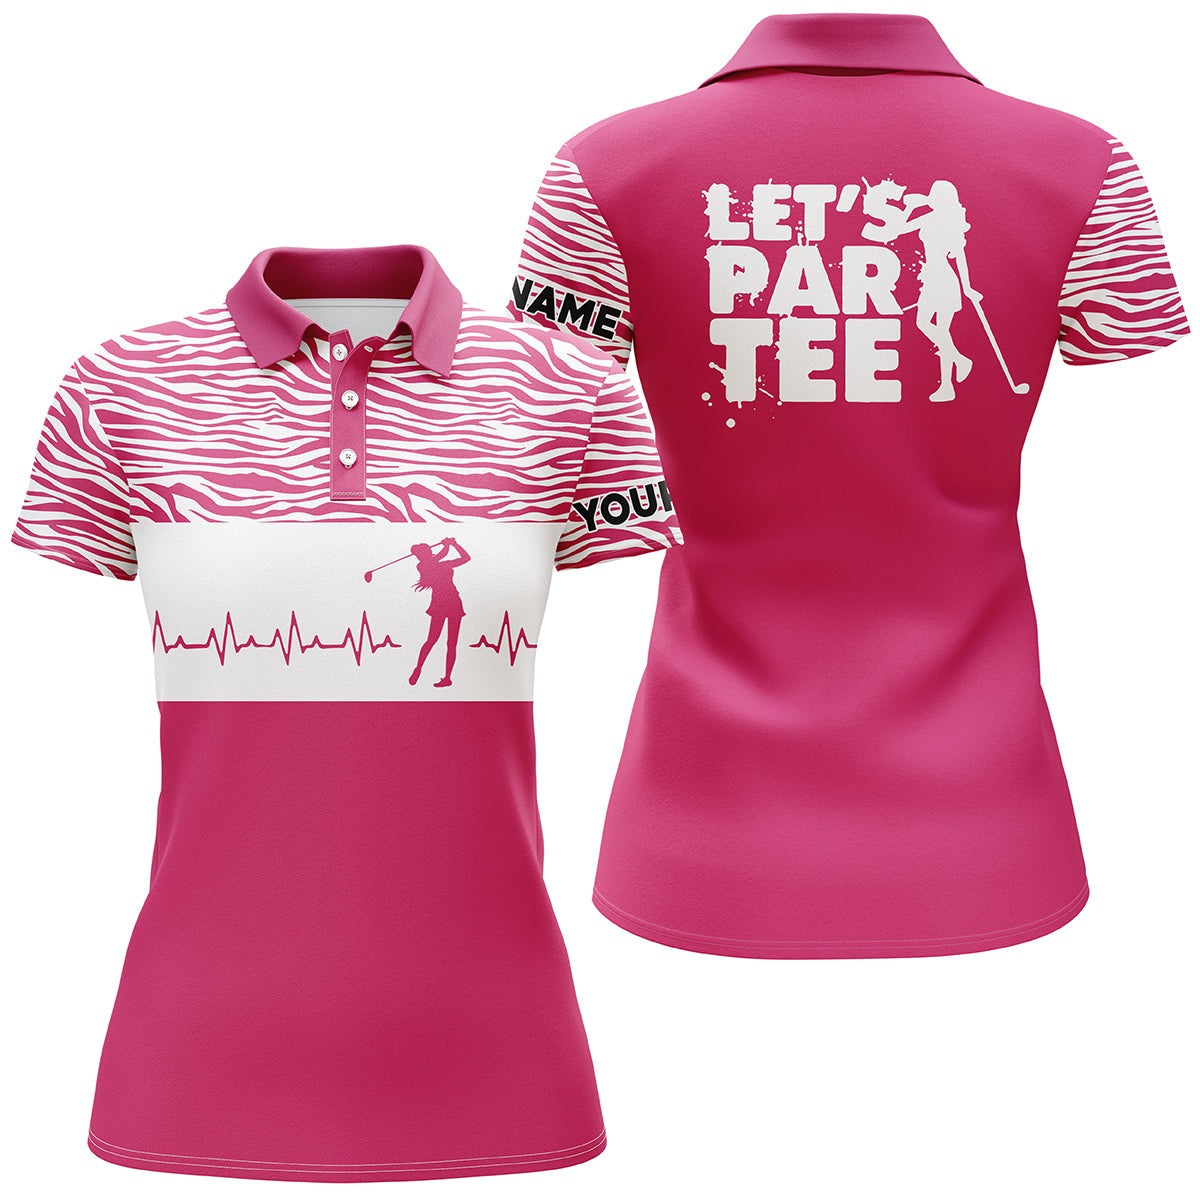 Customized Name Golf Women Polo Shirts, Pink Heartbeat Personalized Let's Par Tee Golf Heartbeat Shirts - Perfect Gift For Ladies Golf Lovers, Golfers